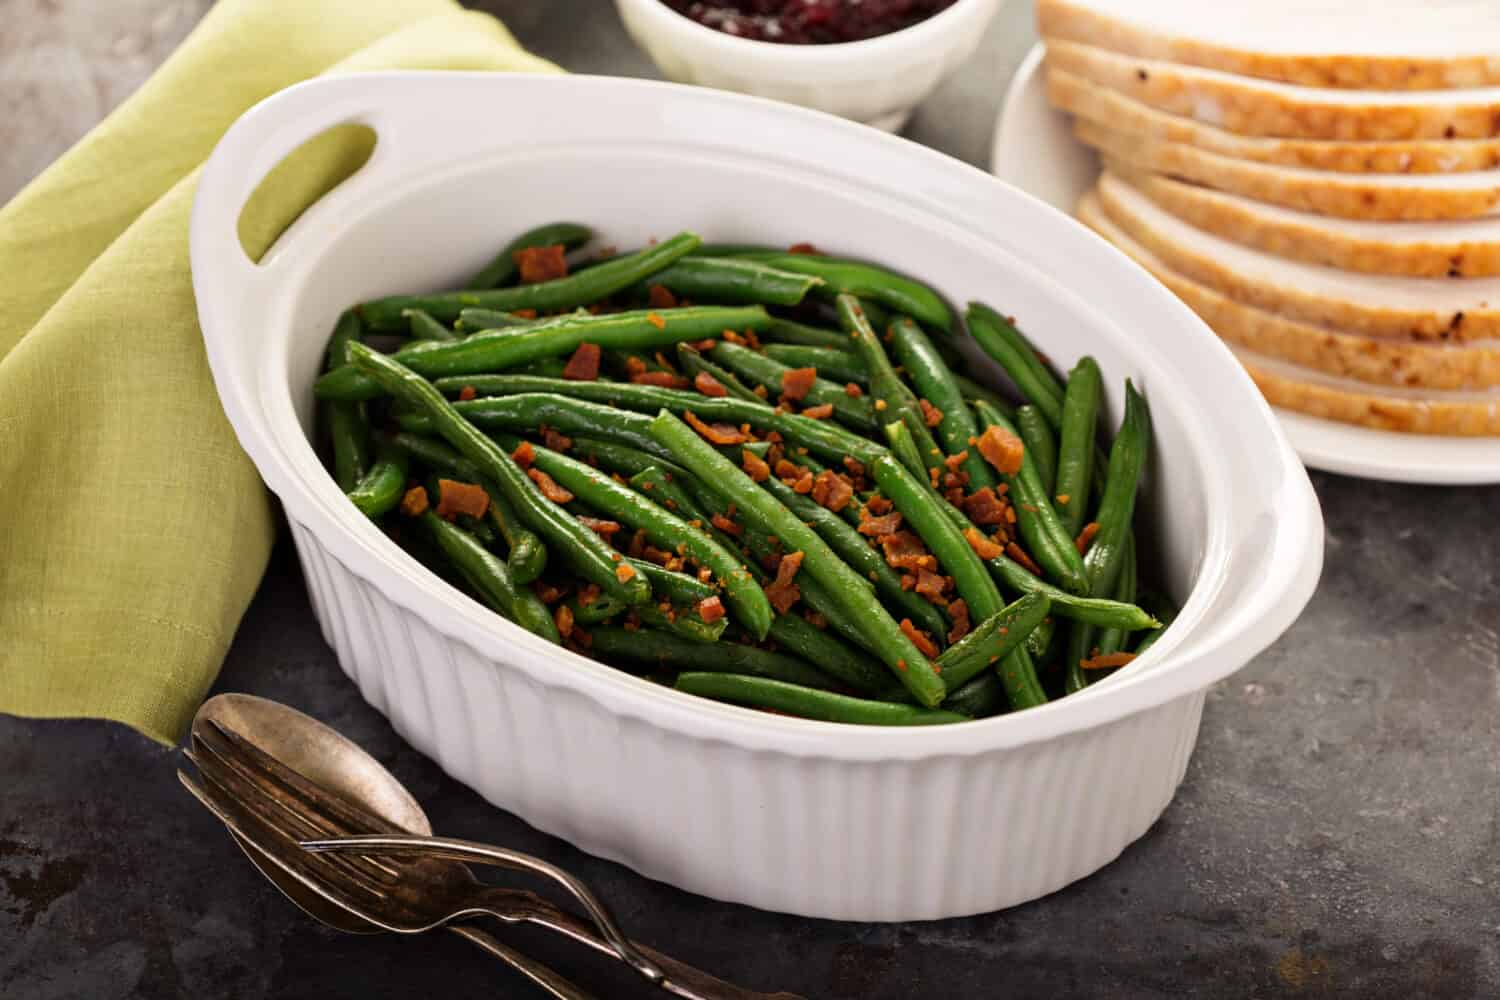 Green beans with bacon, side dish for Thanksgiving or Christmas dinner